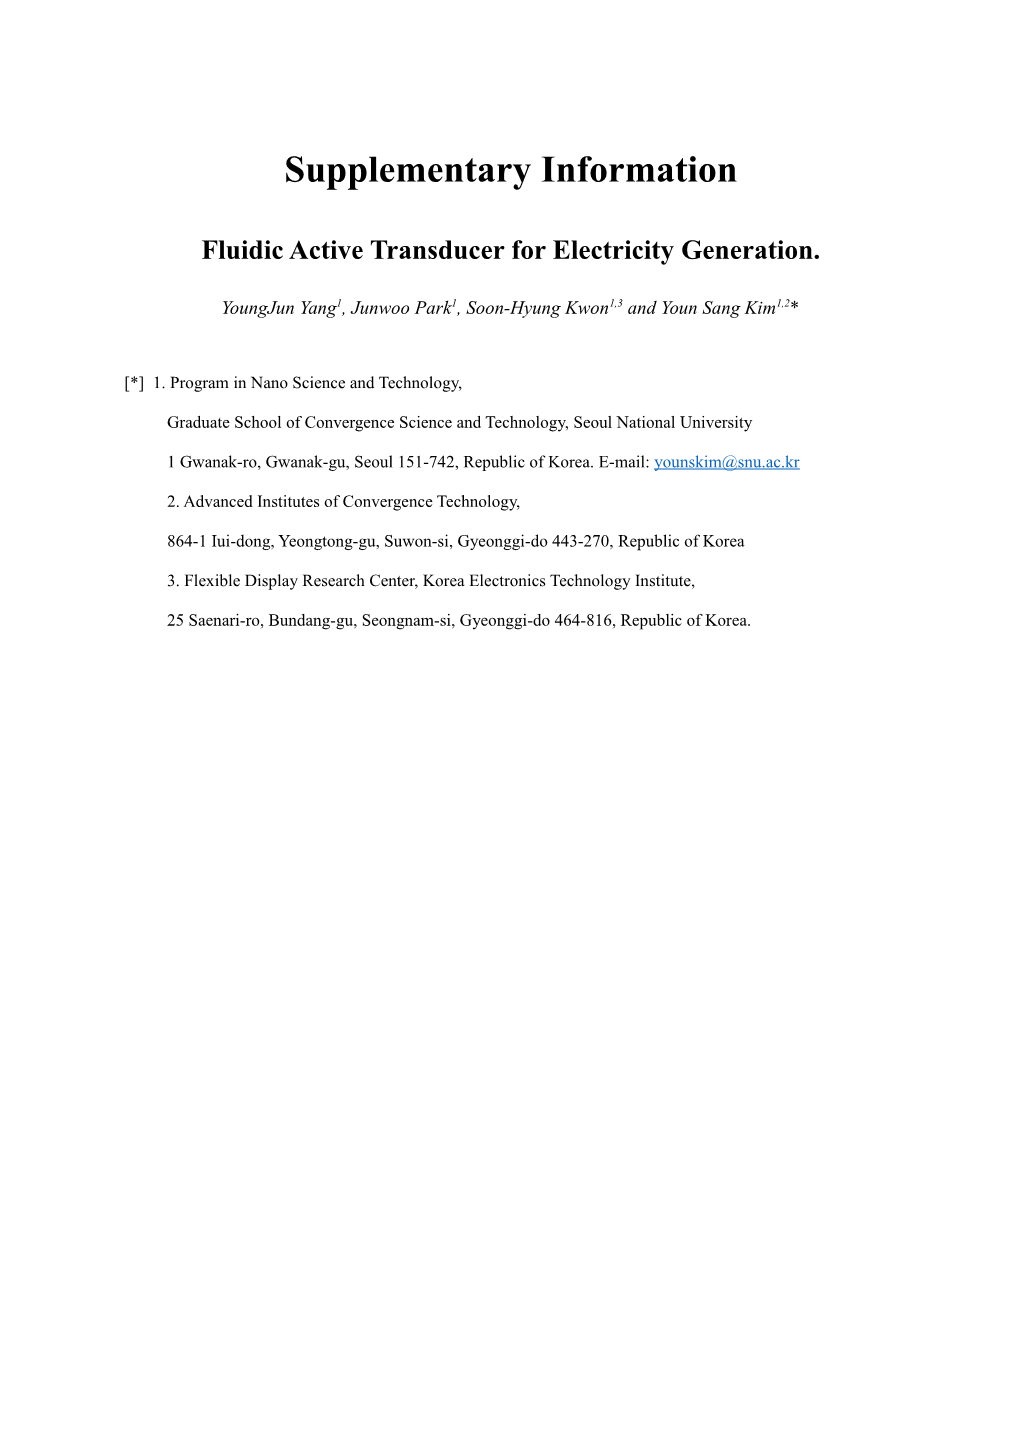 Fluidic Active Transducer for Electricity Generation